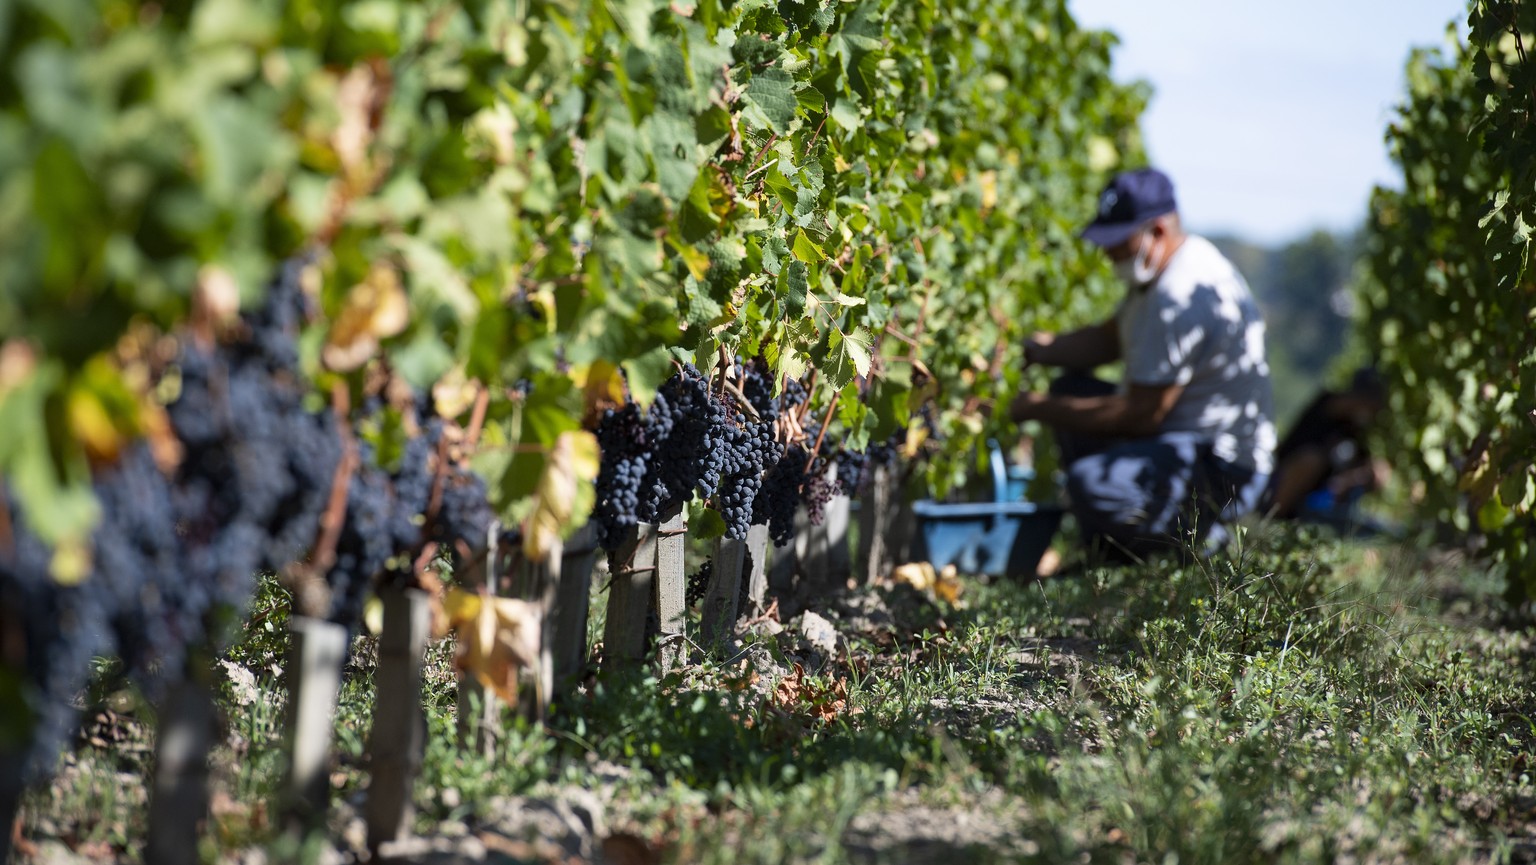 epa08659864 Farm workers harvest grapes at Chateau Grand Corbin-Despagne vineyard in Saint-Emilion near Bordeaux, France, 10 September 2020. The vineyard has implemented strict sanitary measures to cu ...